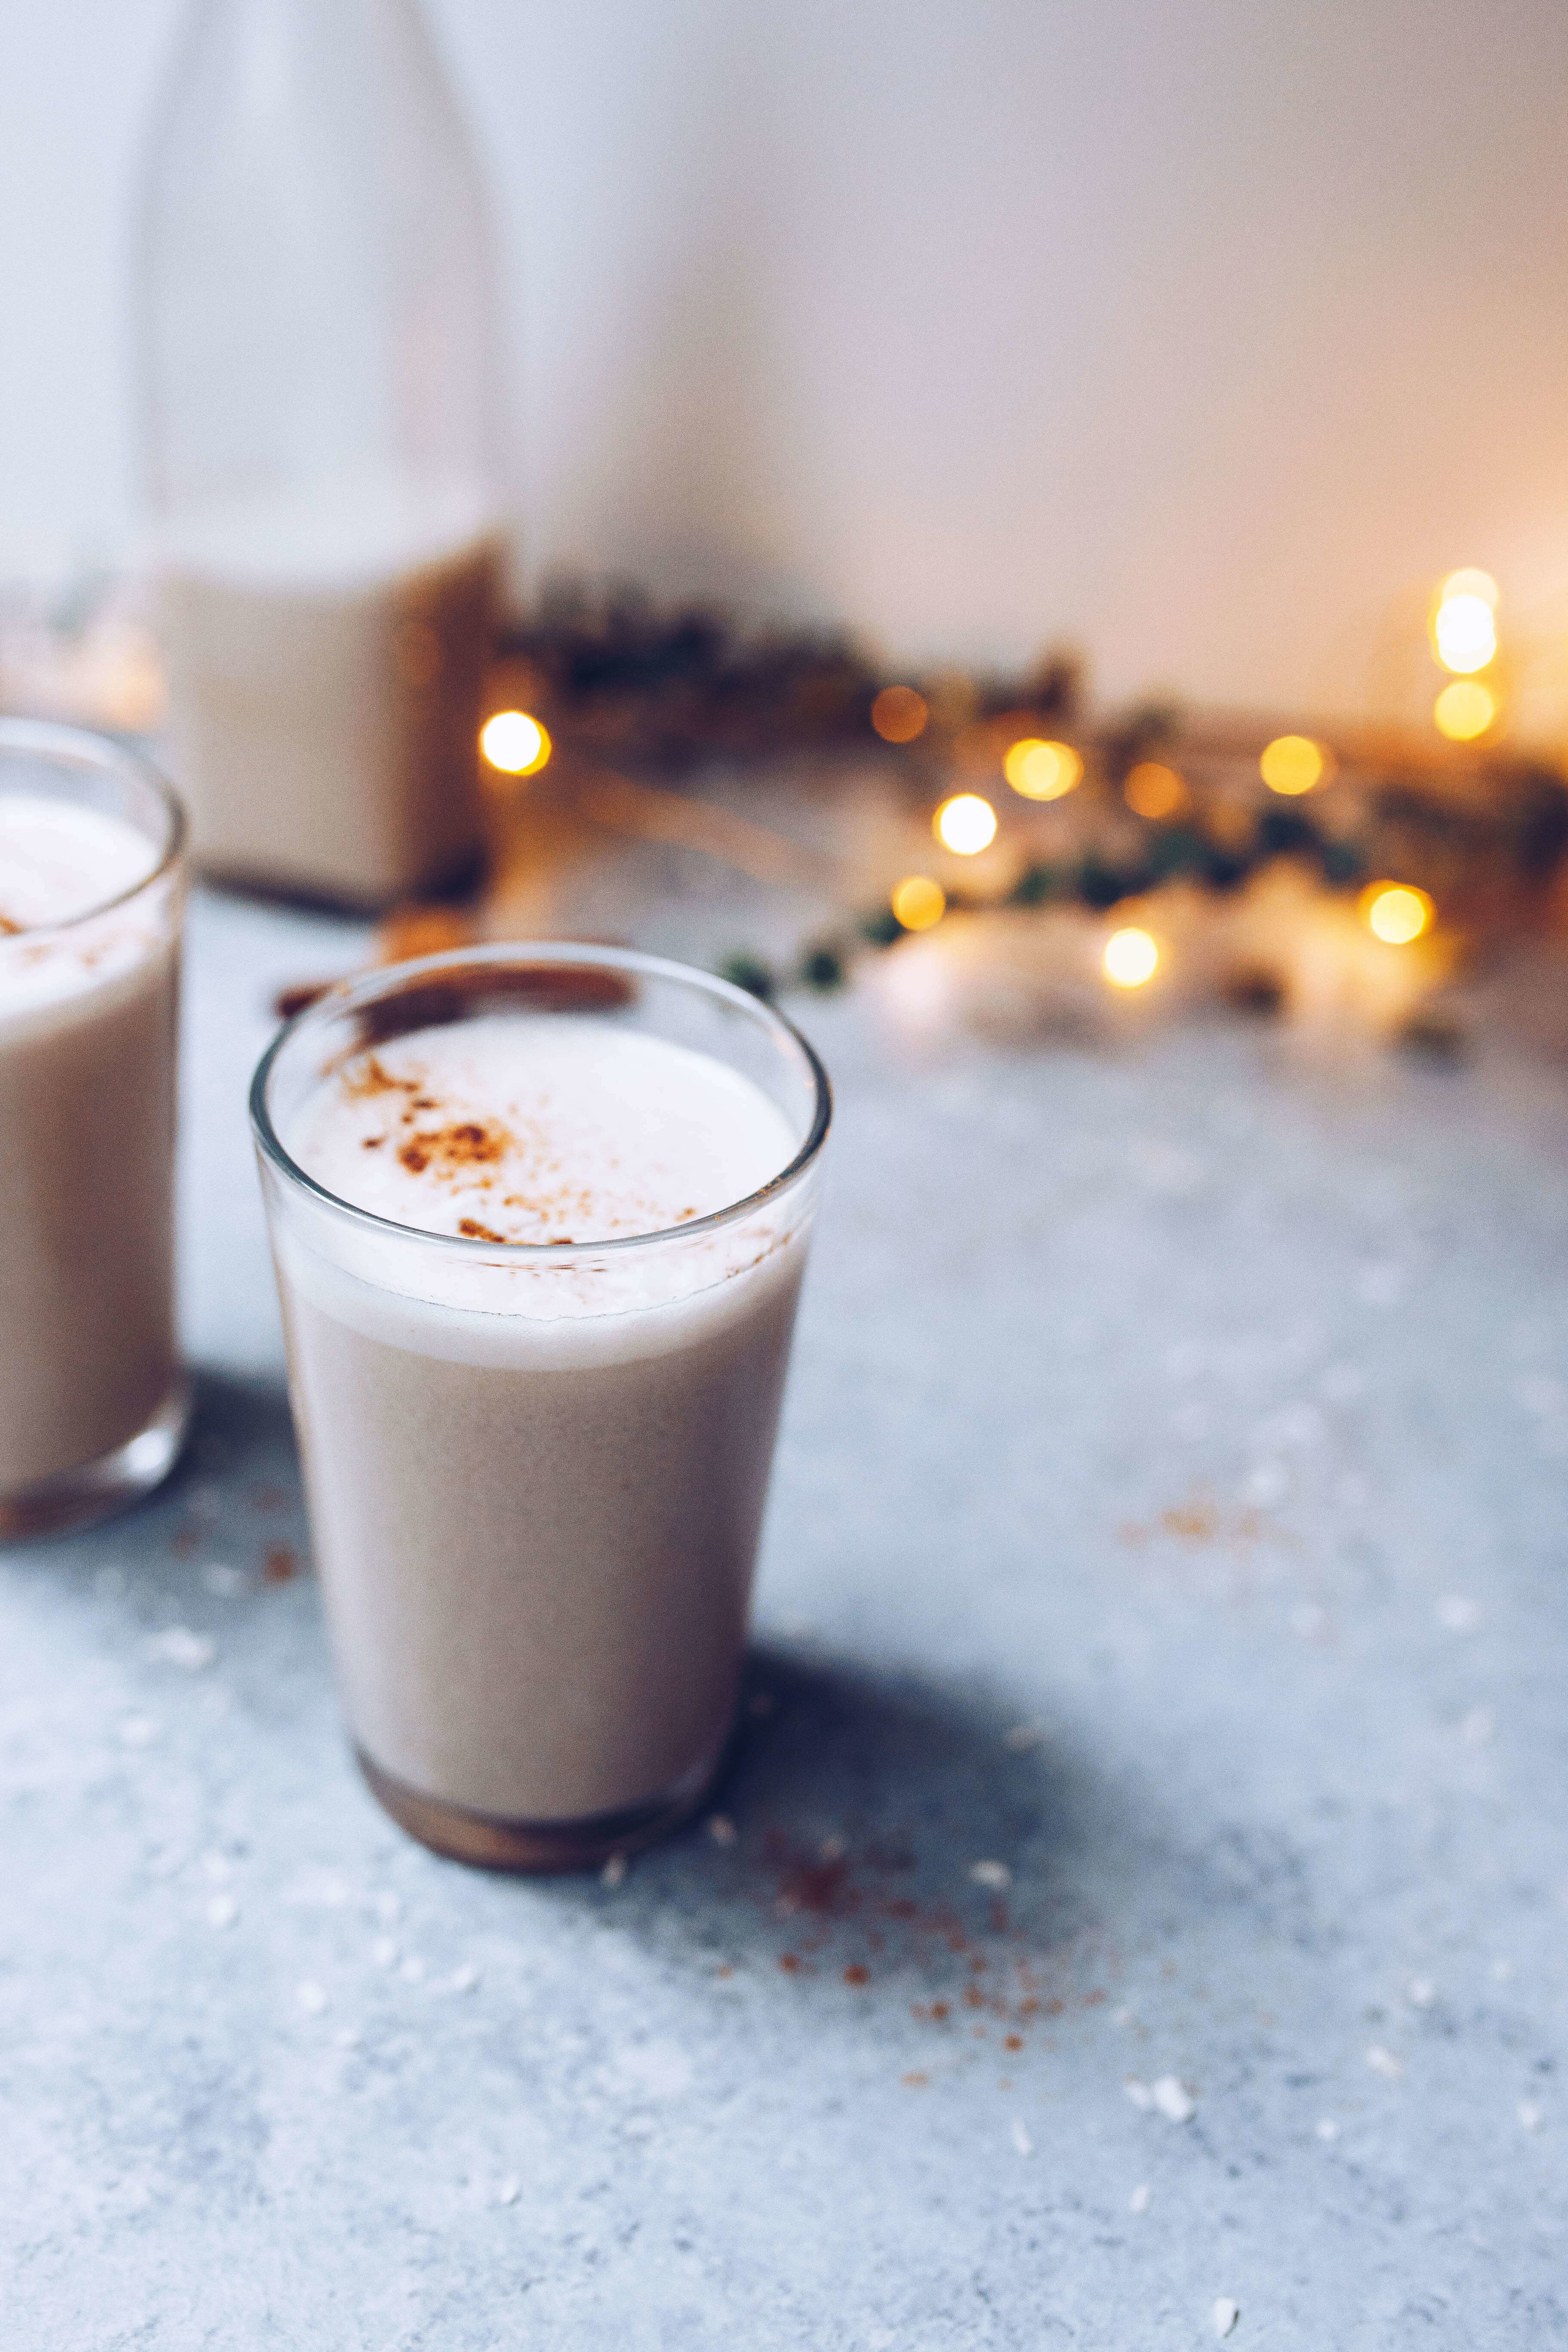 Collagen-boosted Coquito (coconut eggnog) via Food by Mars (dairy-free, paleo, aip-friendly)